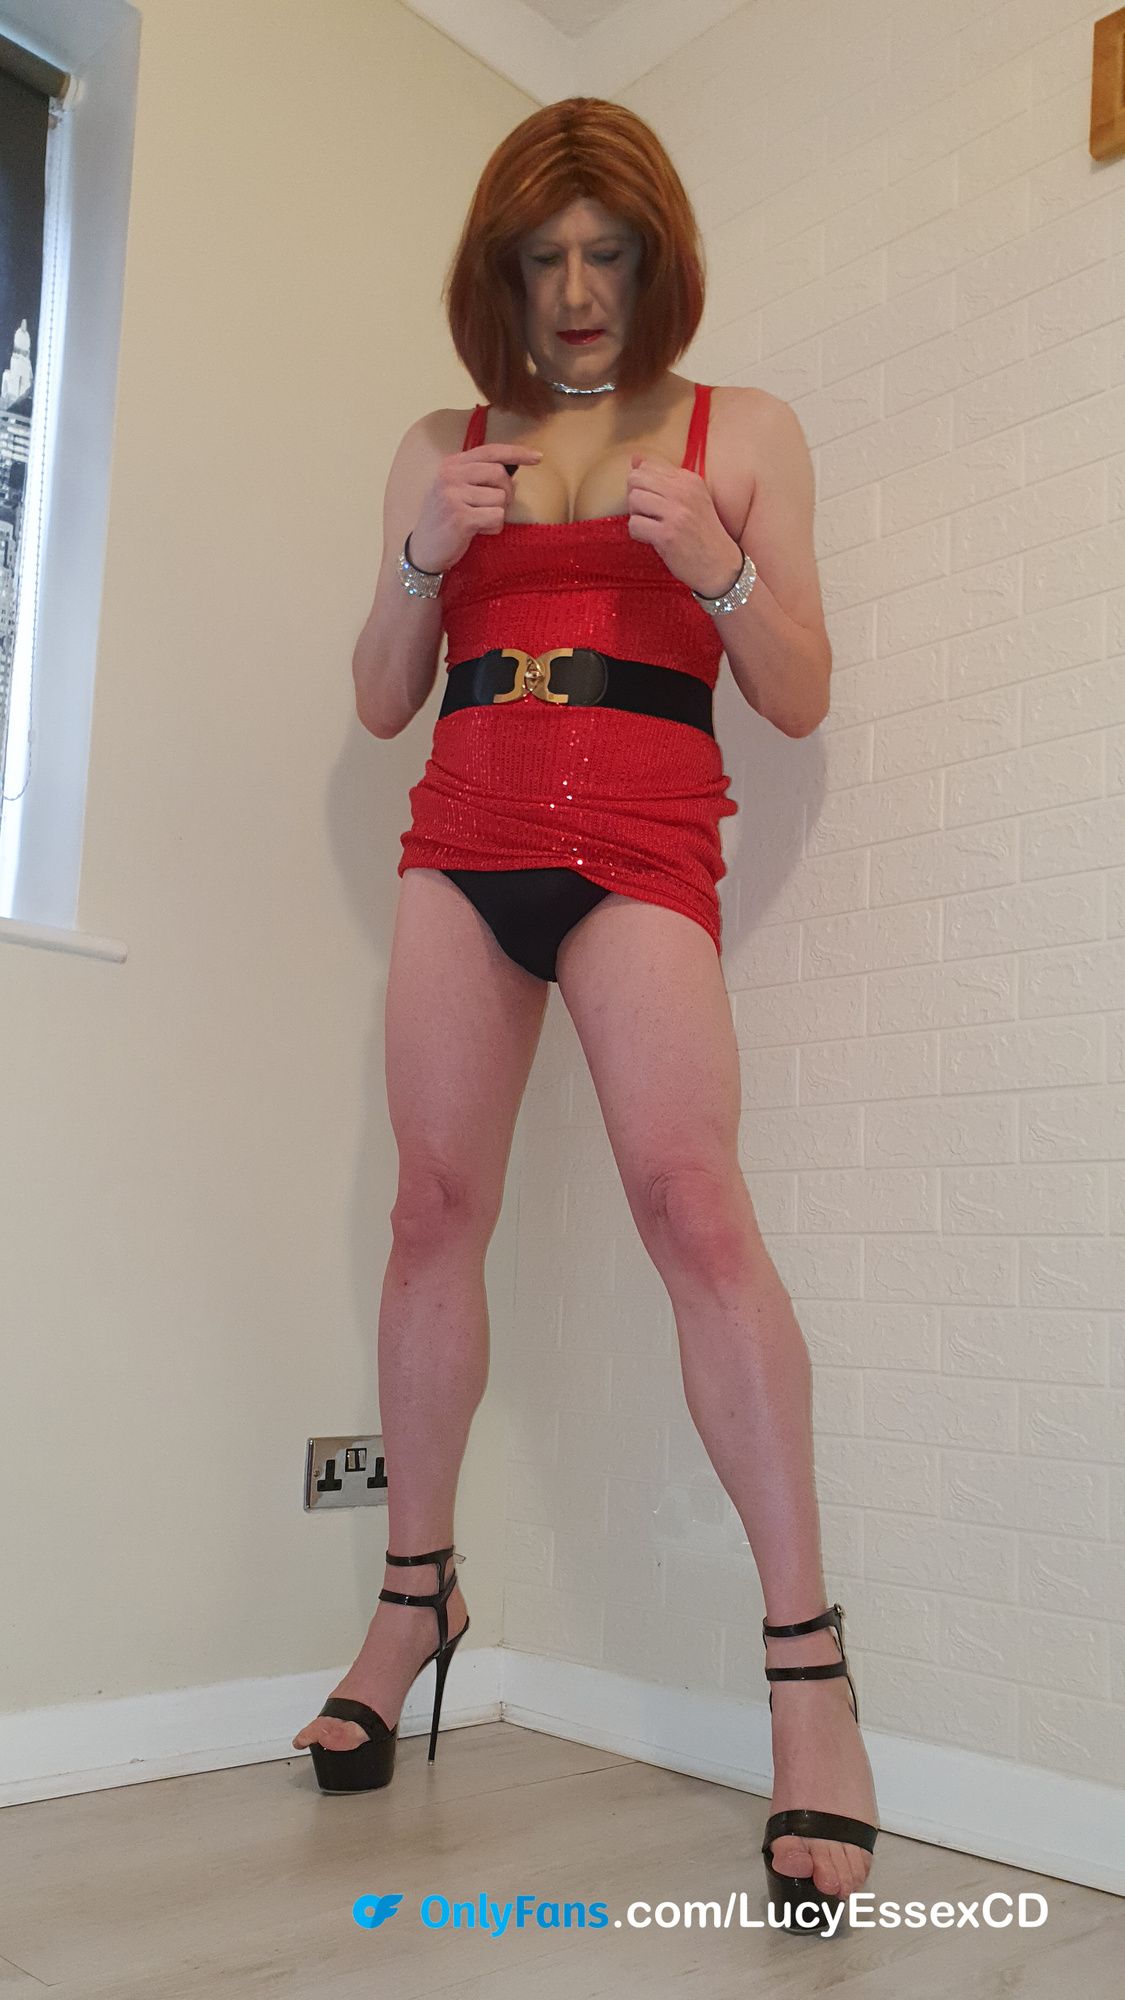 Sissy Lucy flashing my knickers and cock in red sequin dress #8